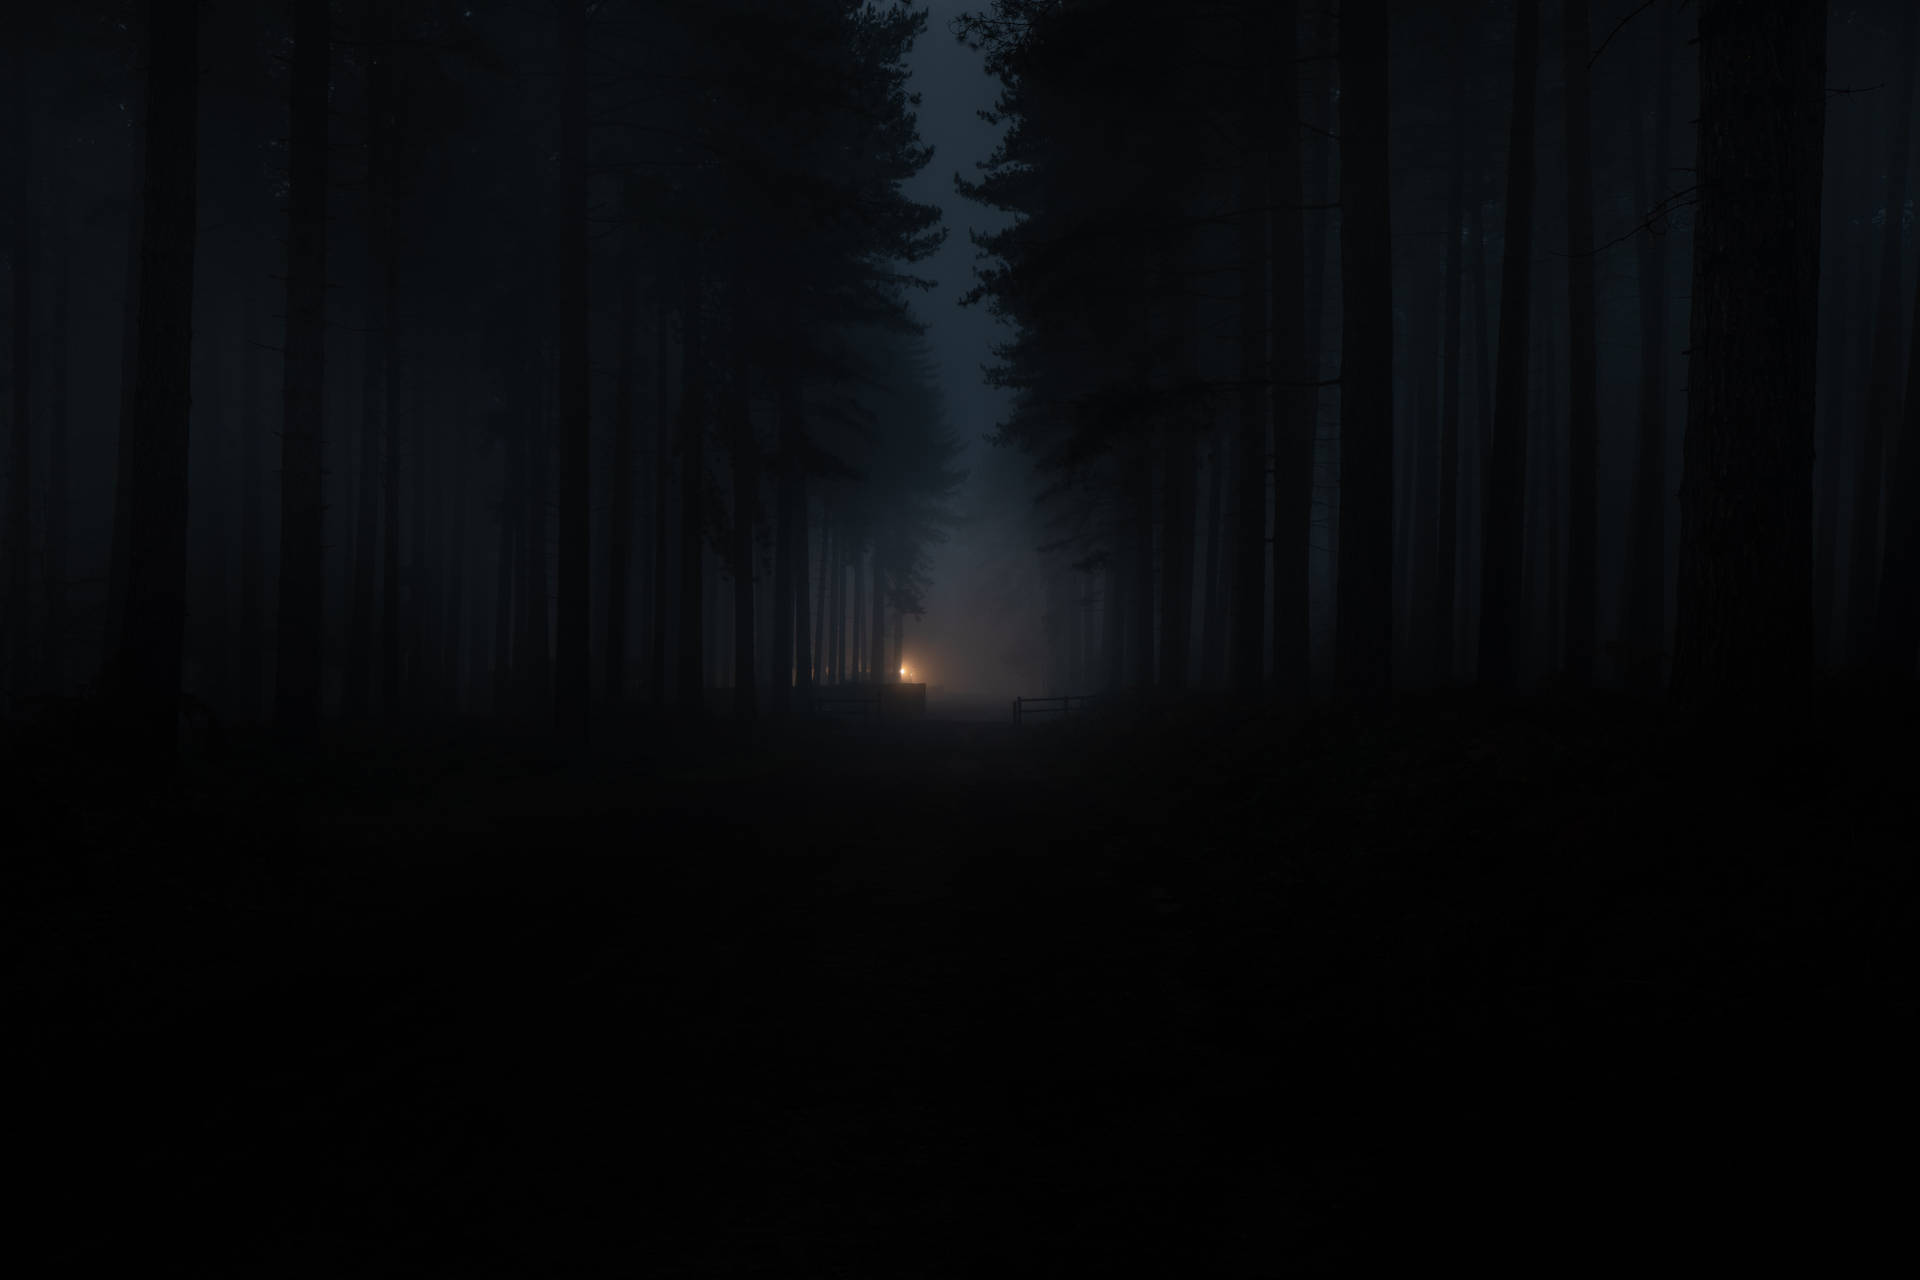 Lost In The Mysticism Of The Dark Forest Wallpaper